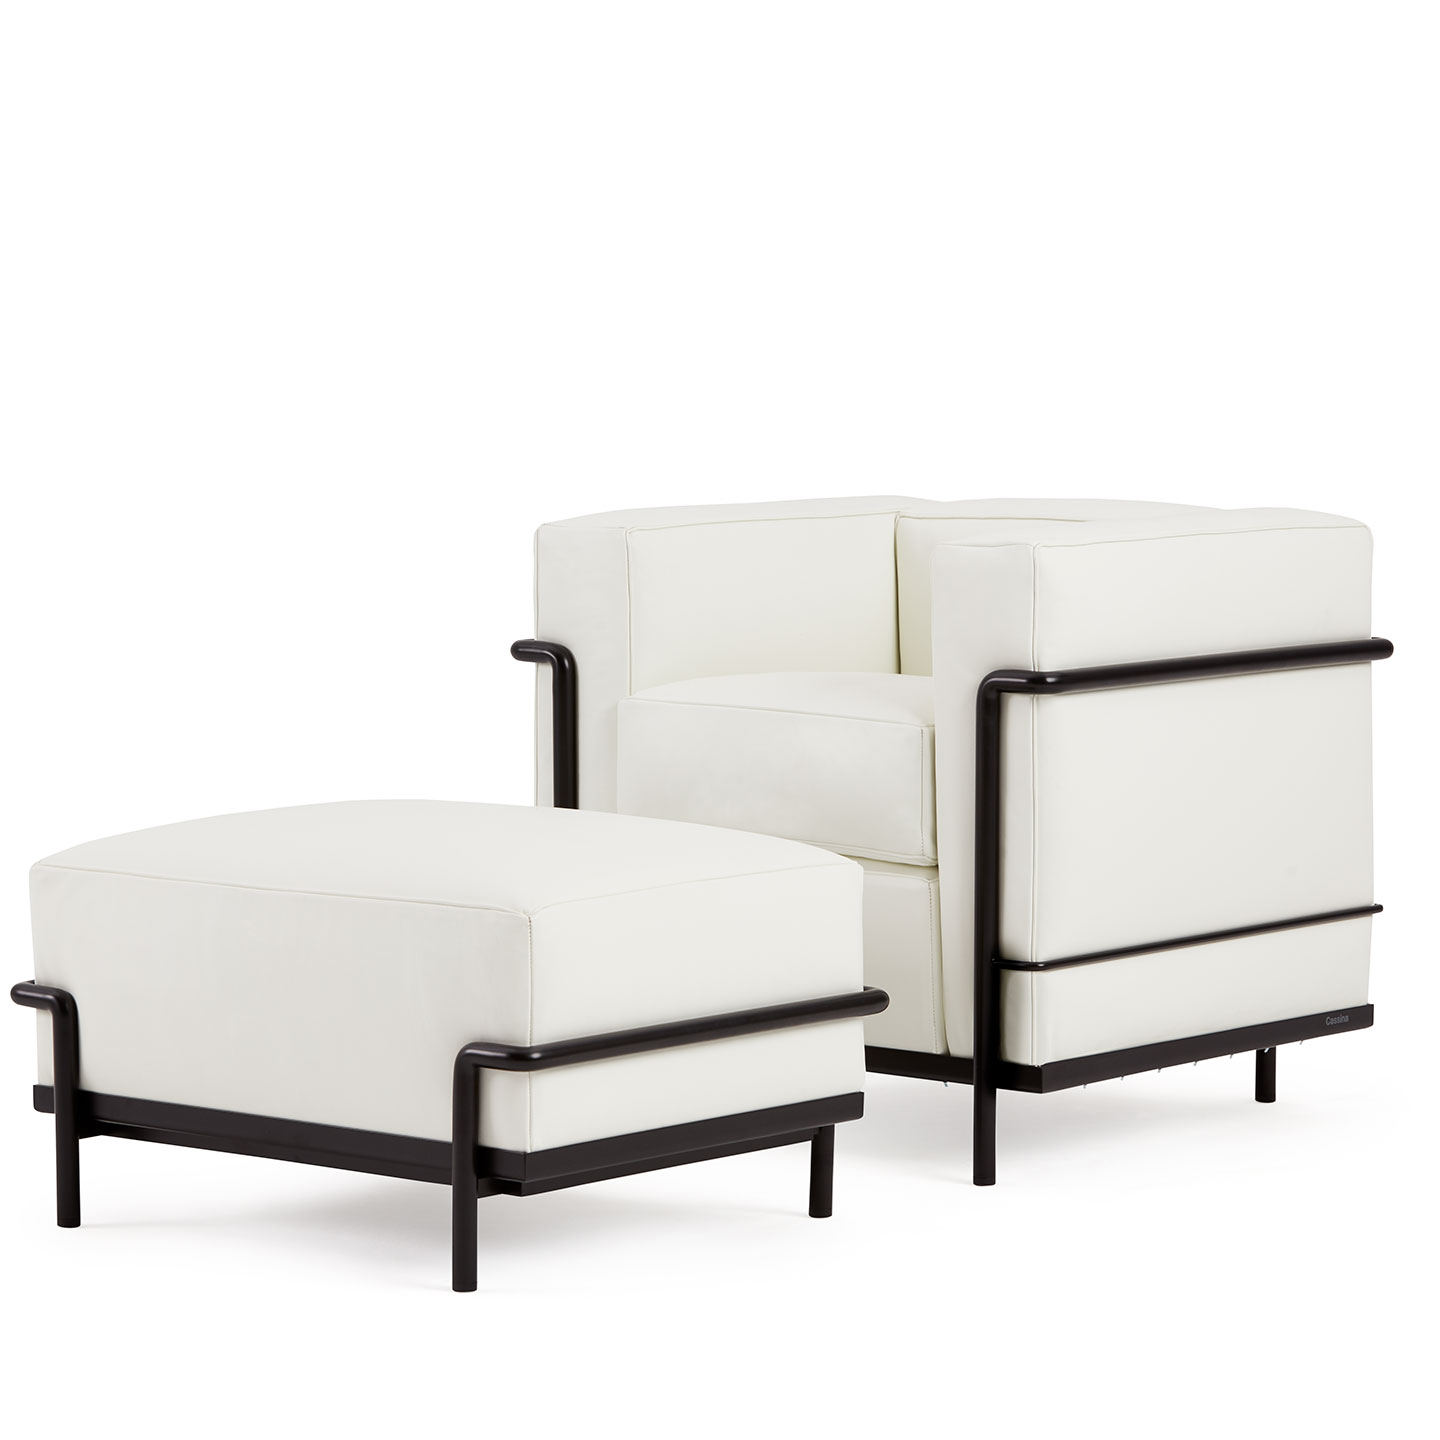 Haworth LC2 lounge chair in white leather with ottoman